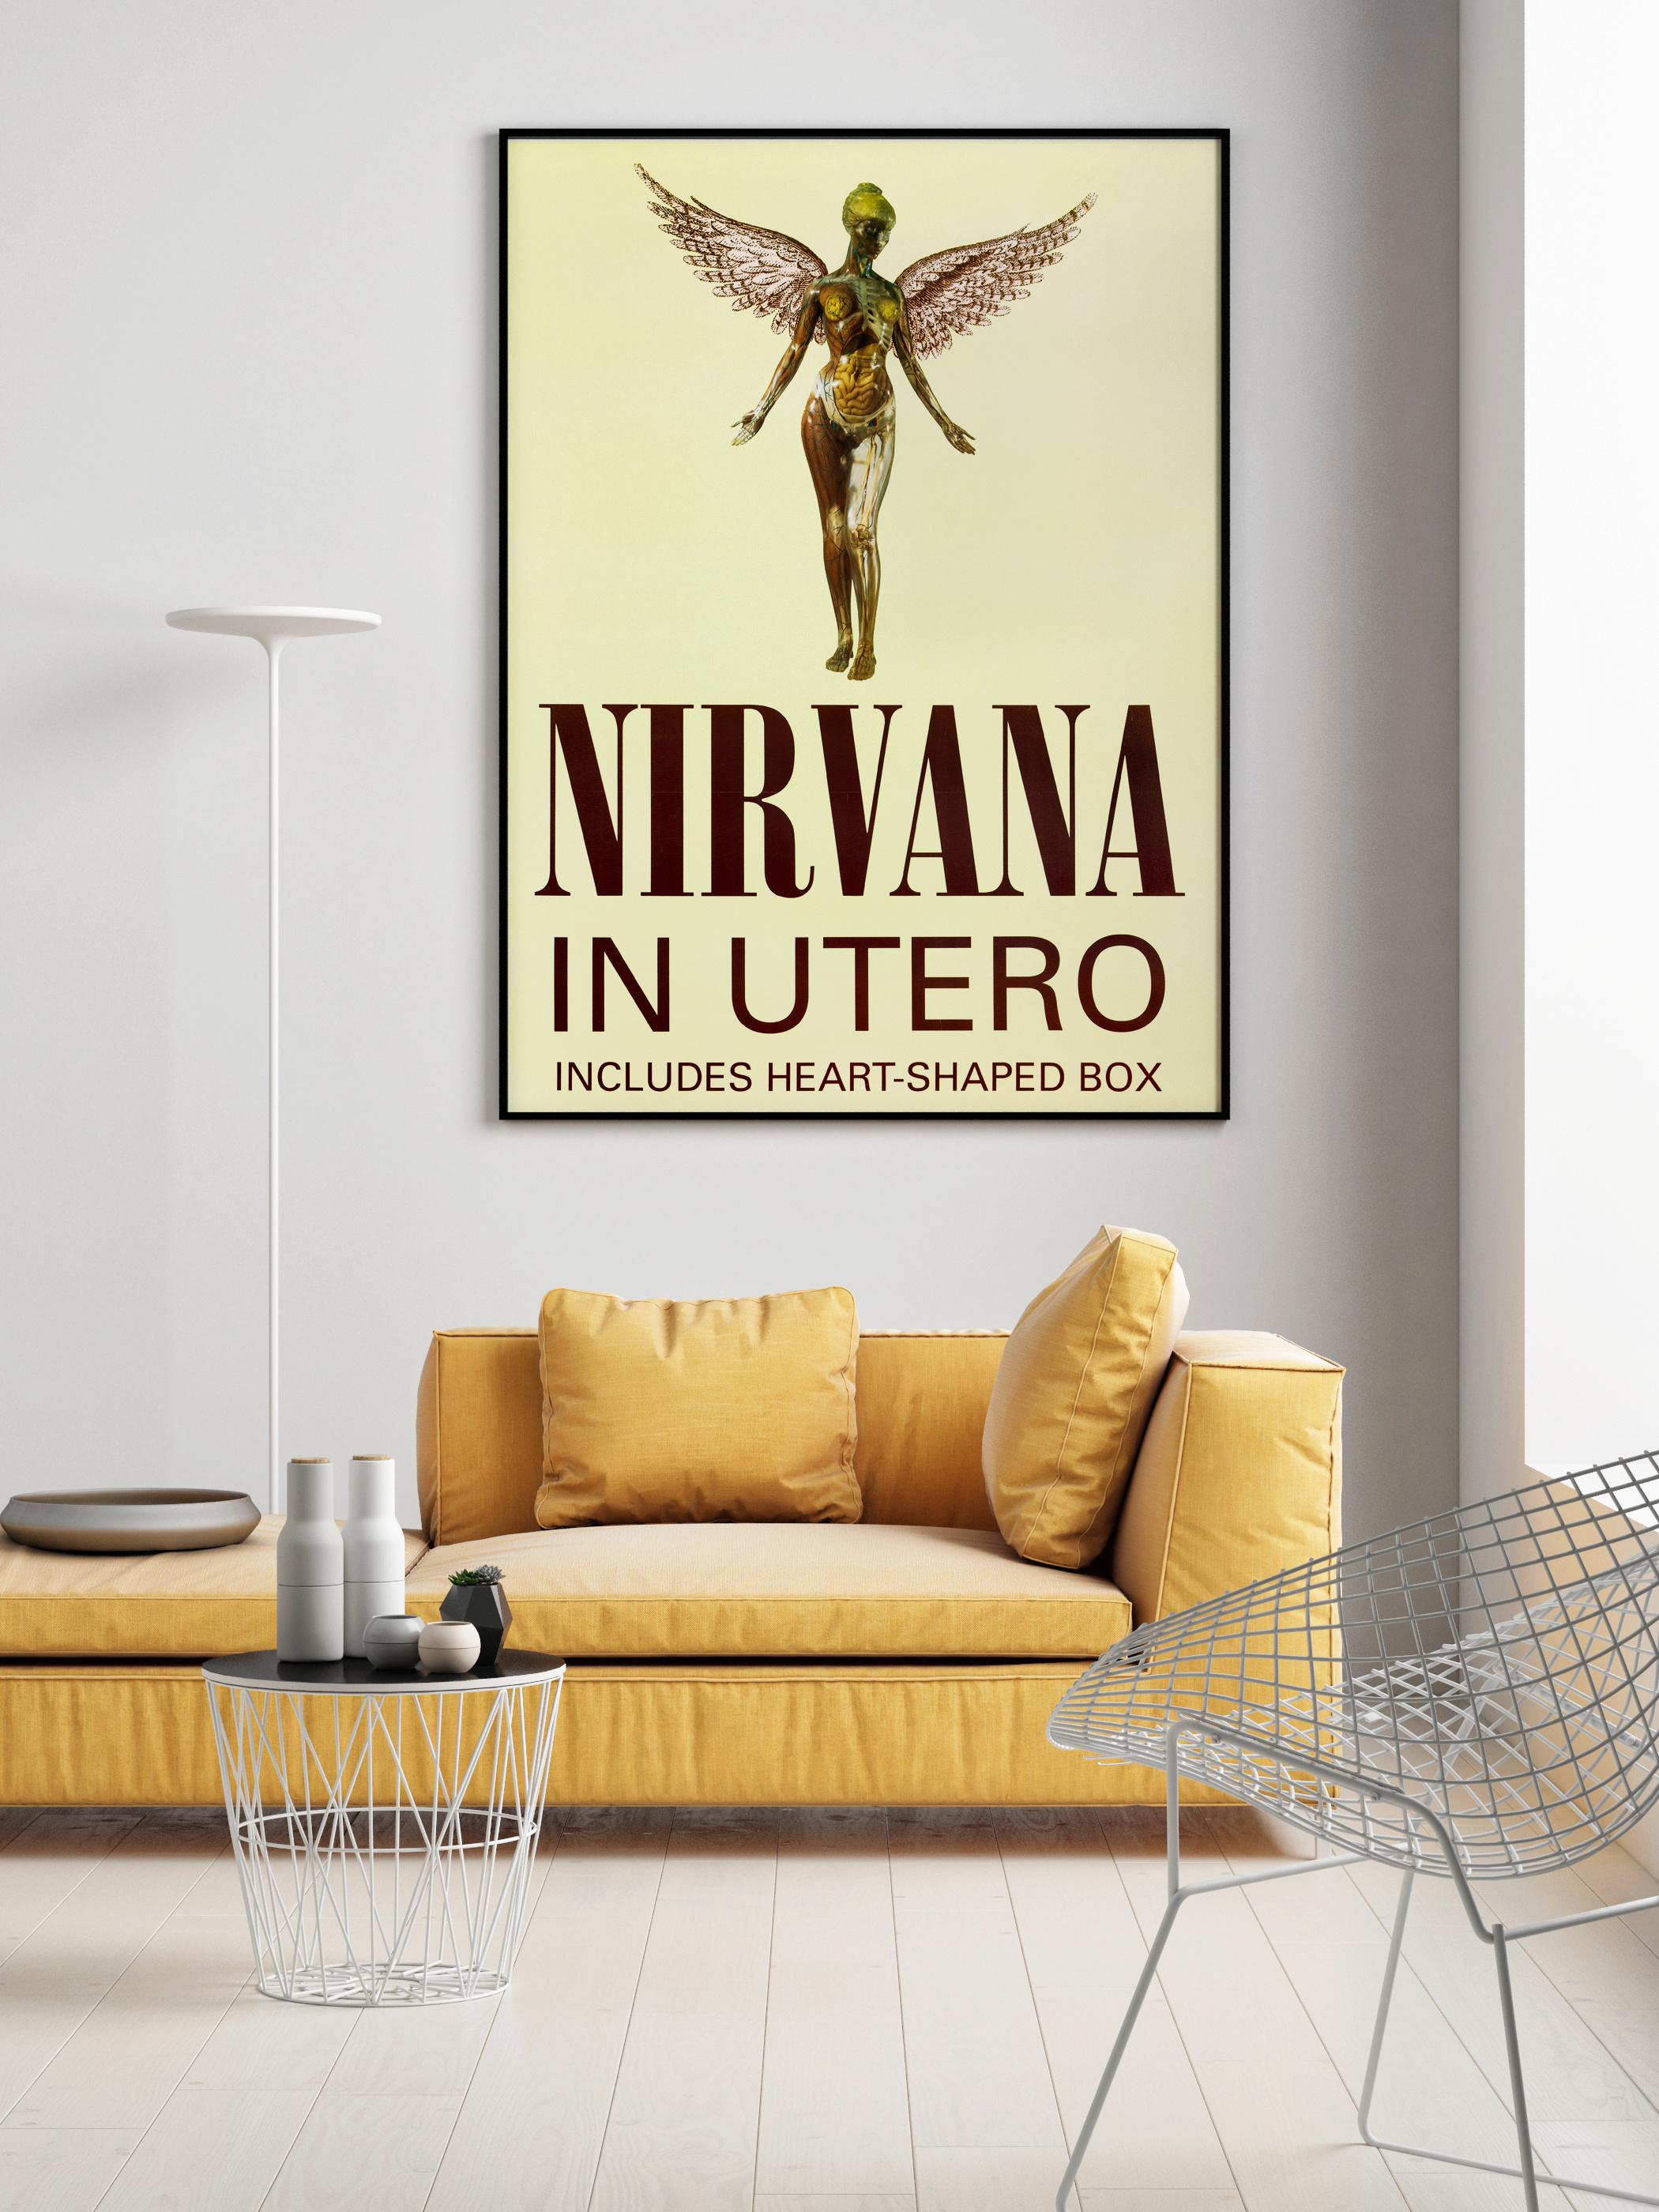 An oversized UK promotional poster for the September 1993 release of NIrvana's third and final studio album 'In Utero,' following the chart success of the album's lead single 'Heart Shaped Box' in August. Like frontman Kurt Cobain's lyrics, the